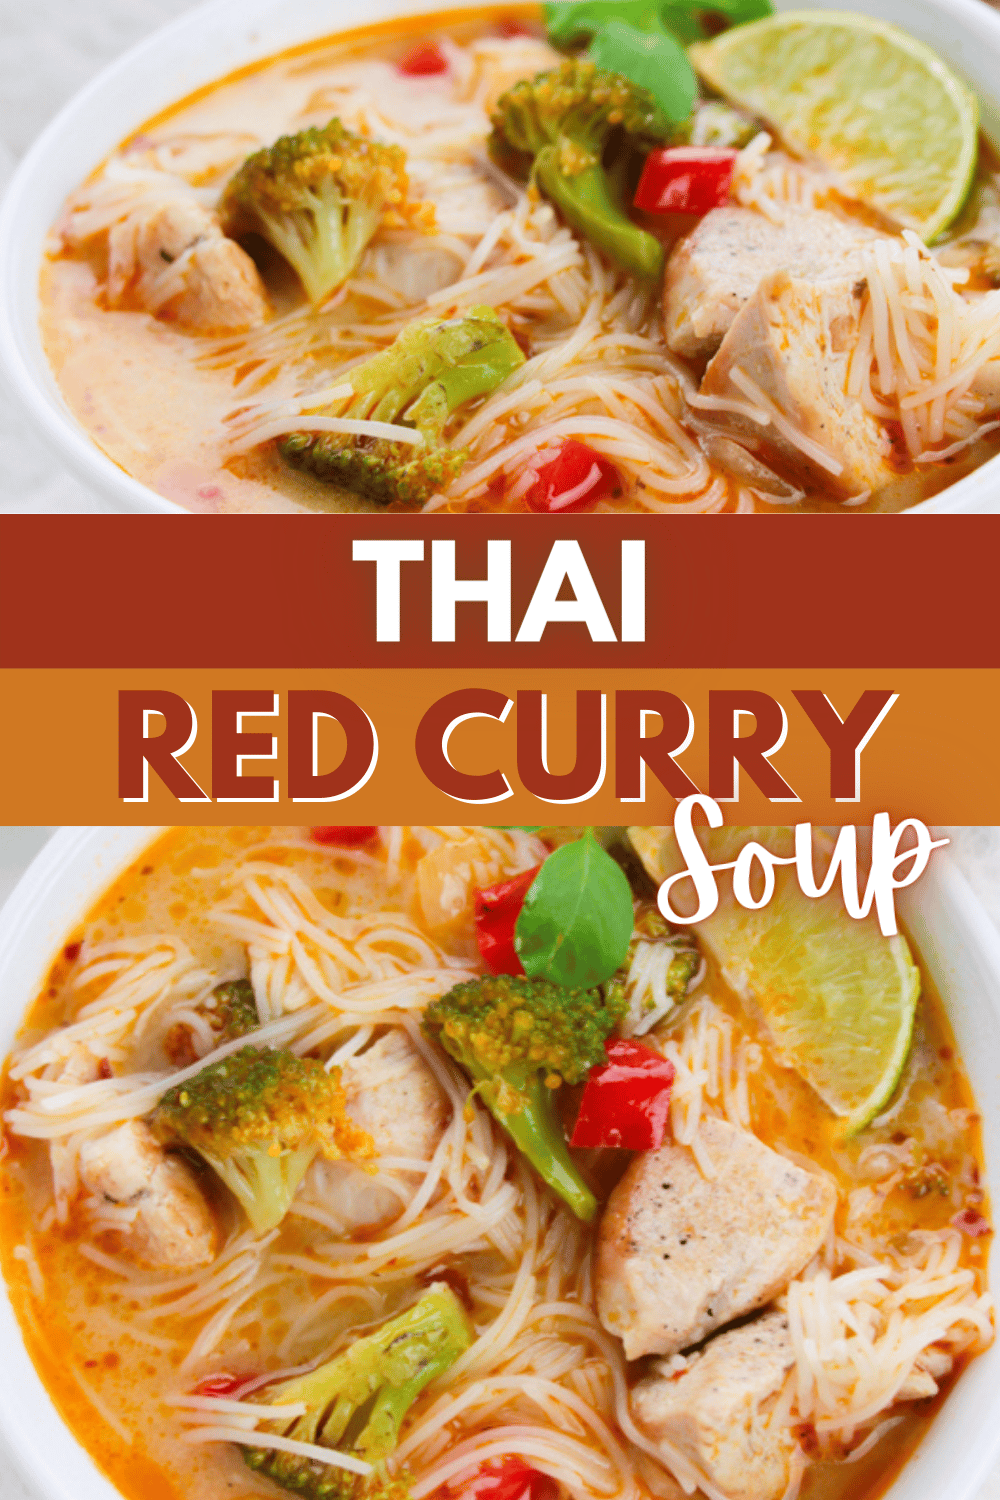 Thai red curry soup is a delicious and easy-to-make soup that is perfect for any occasion. This soup will warm you up from the inside out. #thairedcurrysoup #soup #fallrecipe #thaicurry via @wondermomwannab